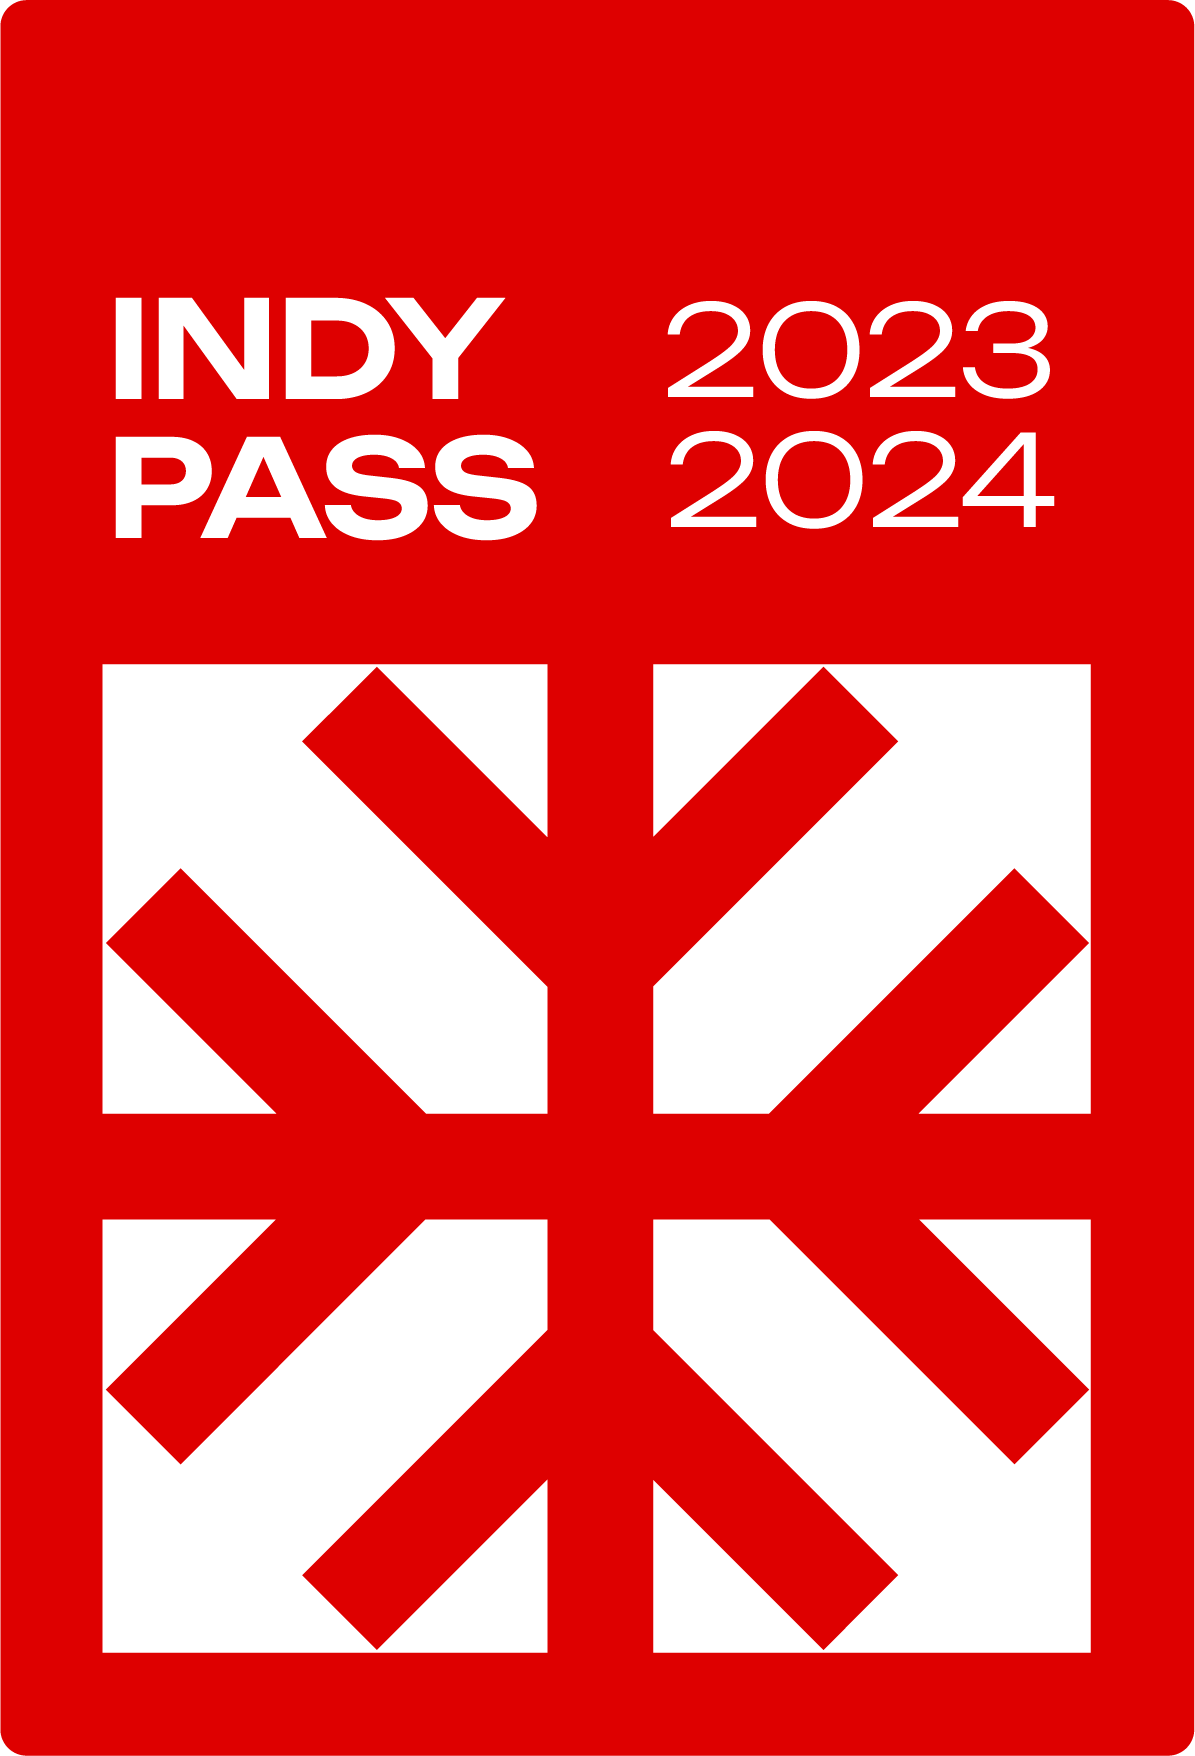 "Indy Pass 2023 2024" red background with red snowflake logo